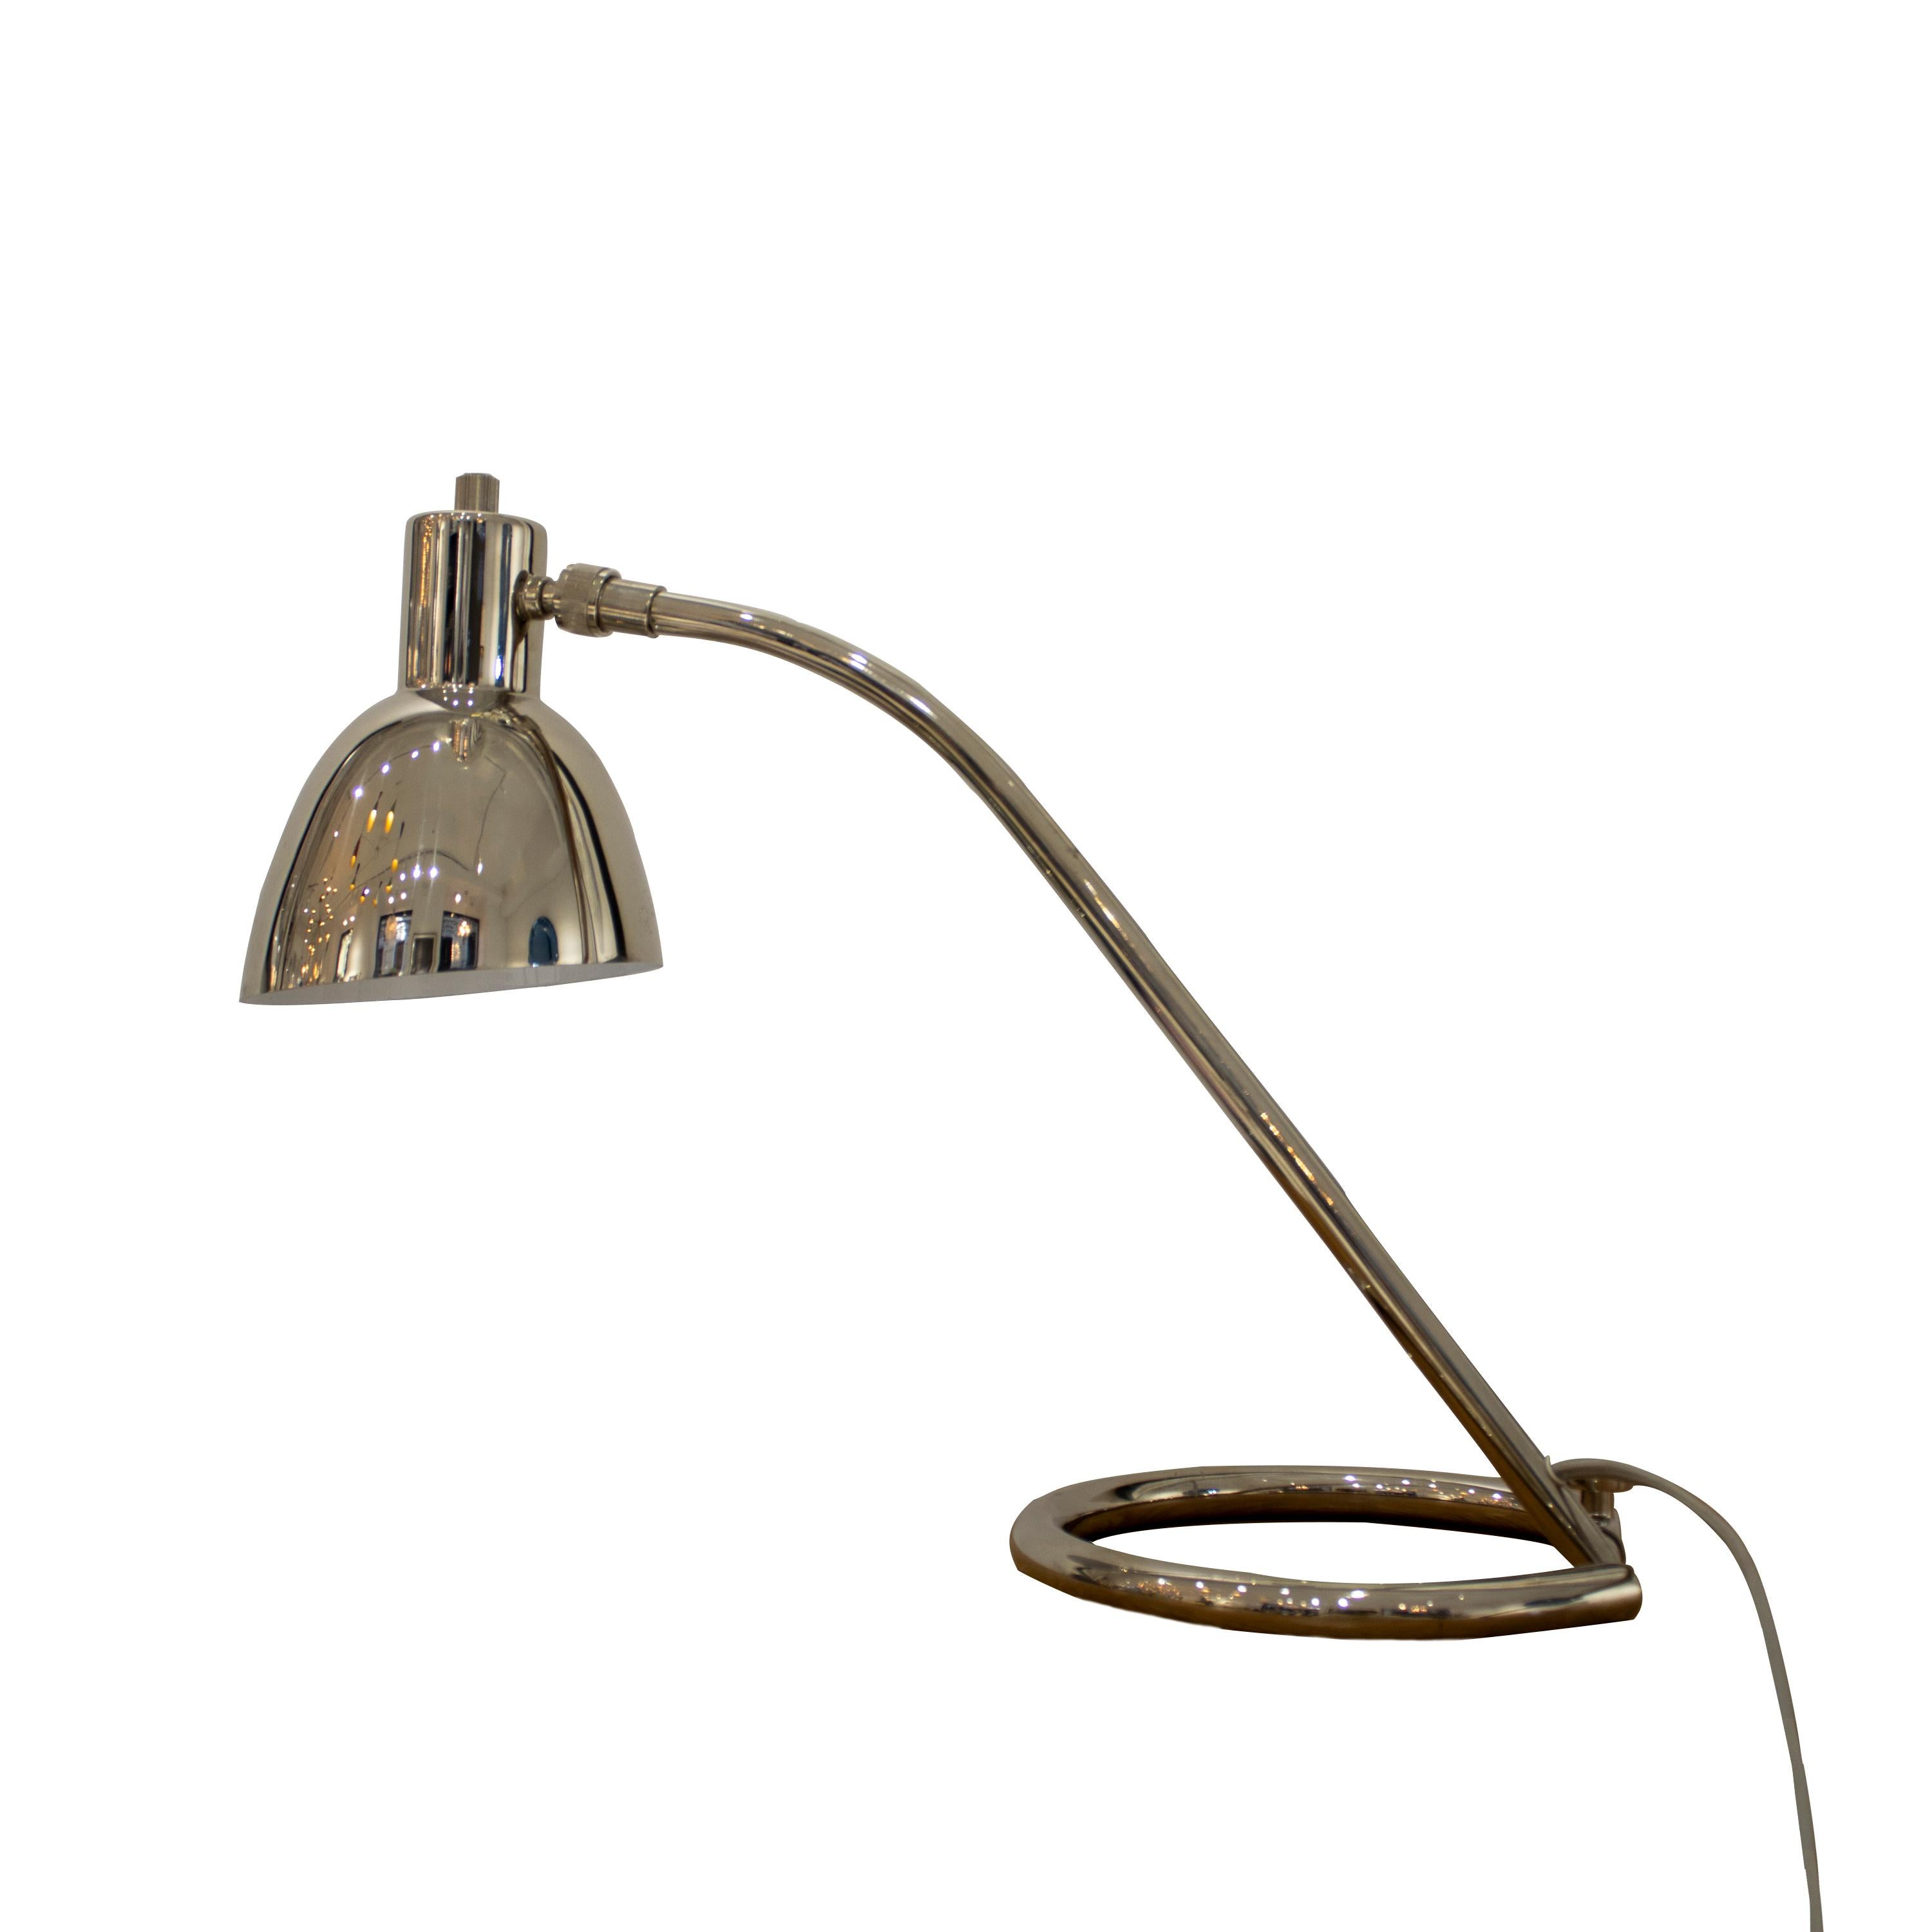 Mid-century modern Italian chromed table lamp. The lamp consists of a one-leg curved tube structure that connects to a semi-circular tube base., with a chrome cone lamp shade. 

Base size: 23 cm (Diamter)